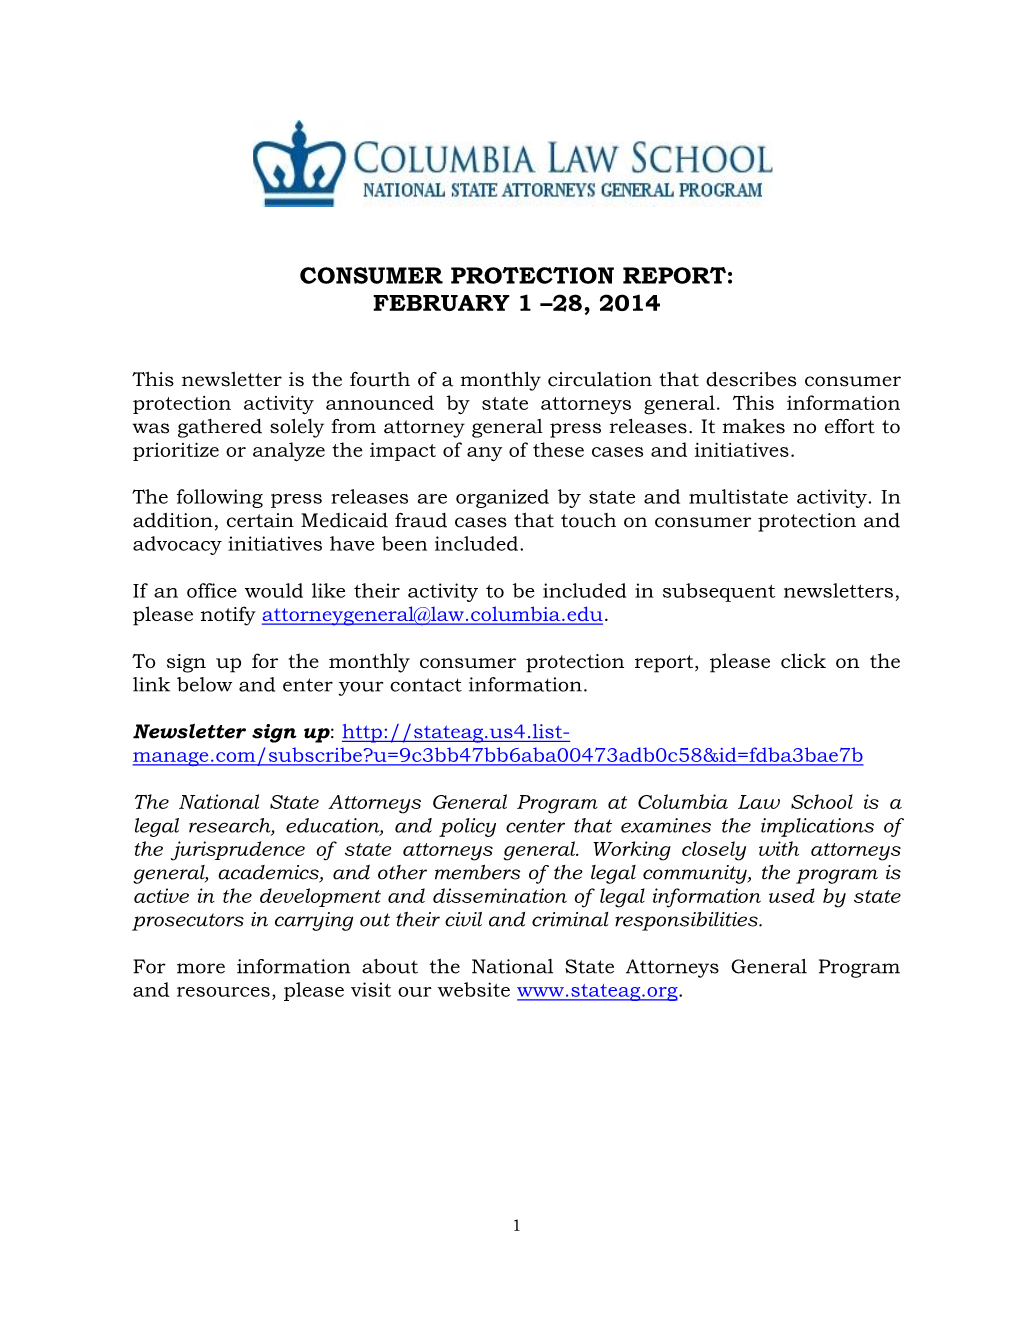 Consumer Protection Report: February 1 –28, 2014